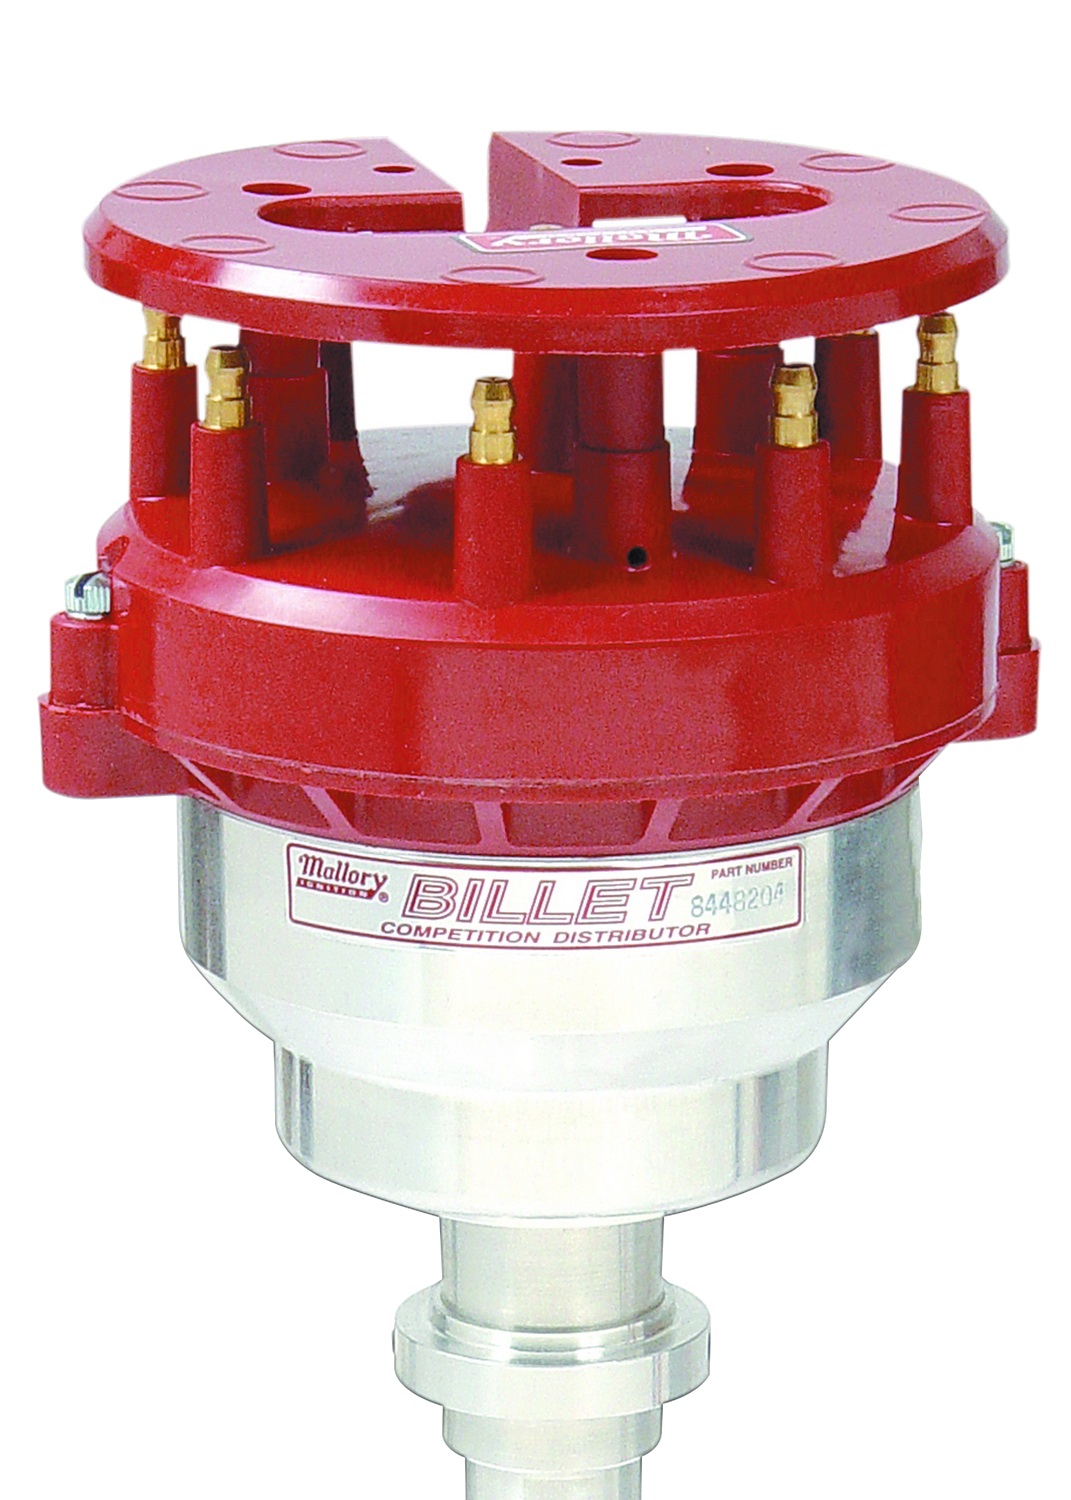 Mallory Mallory 8455405 84 Series; Billet Competition Distributor